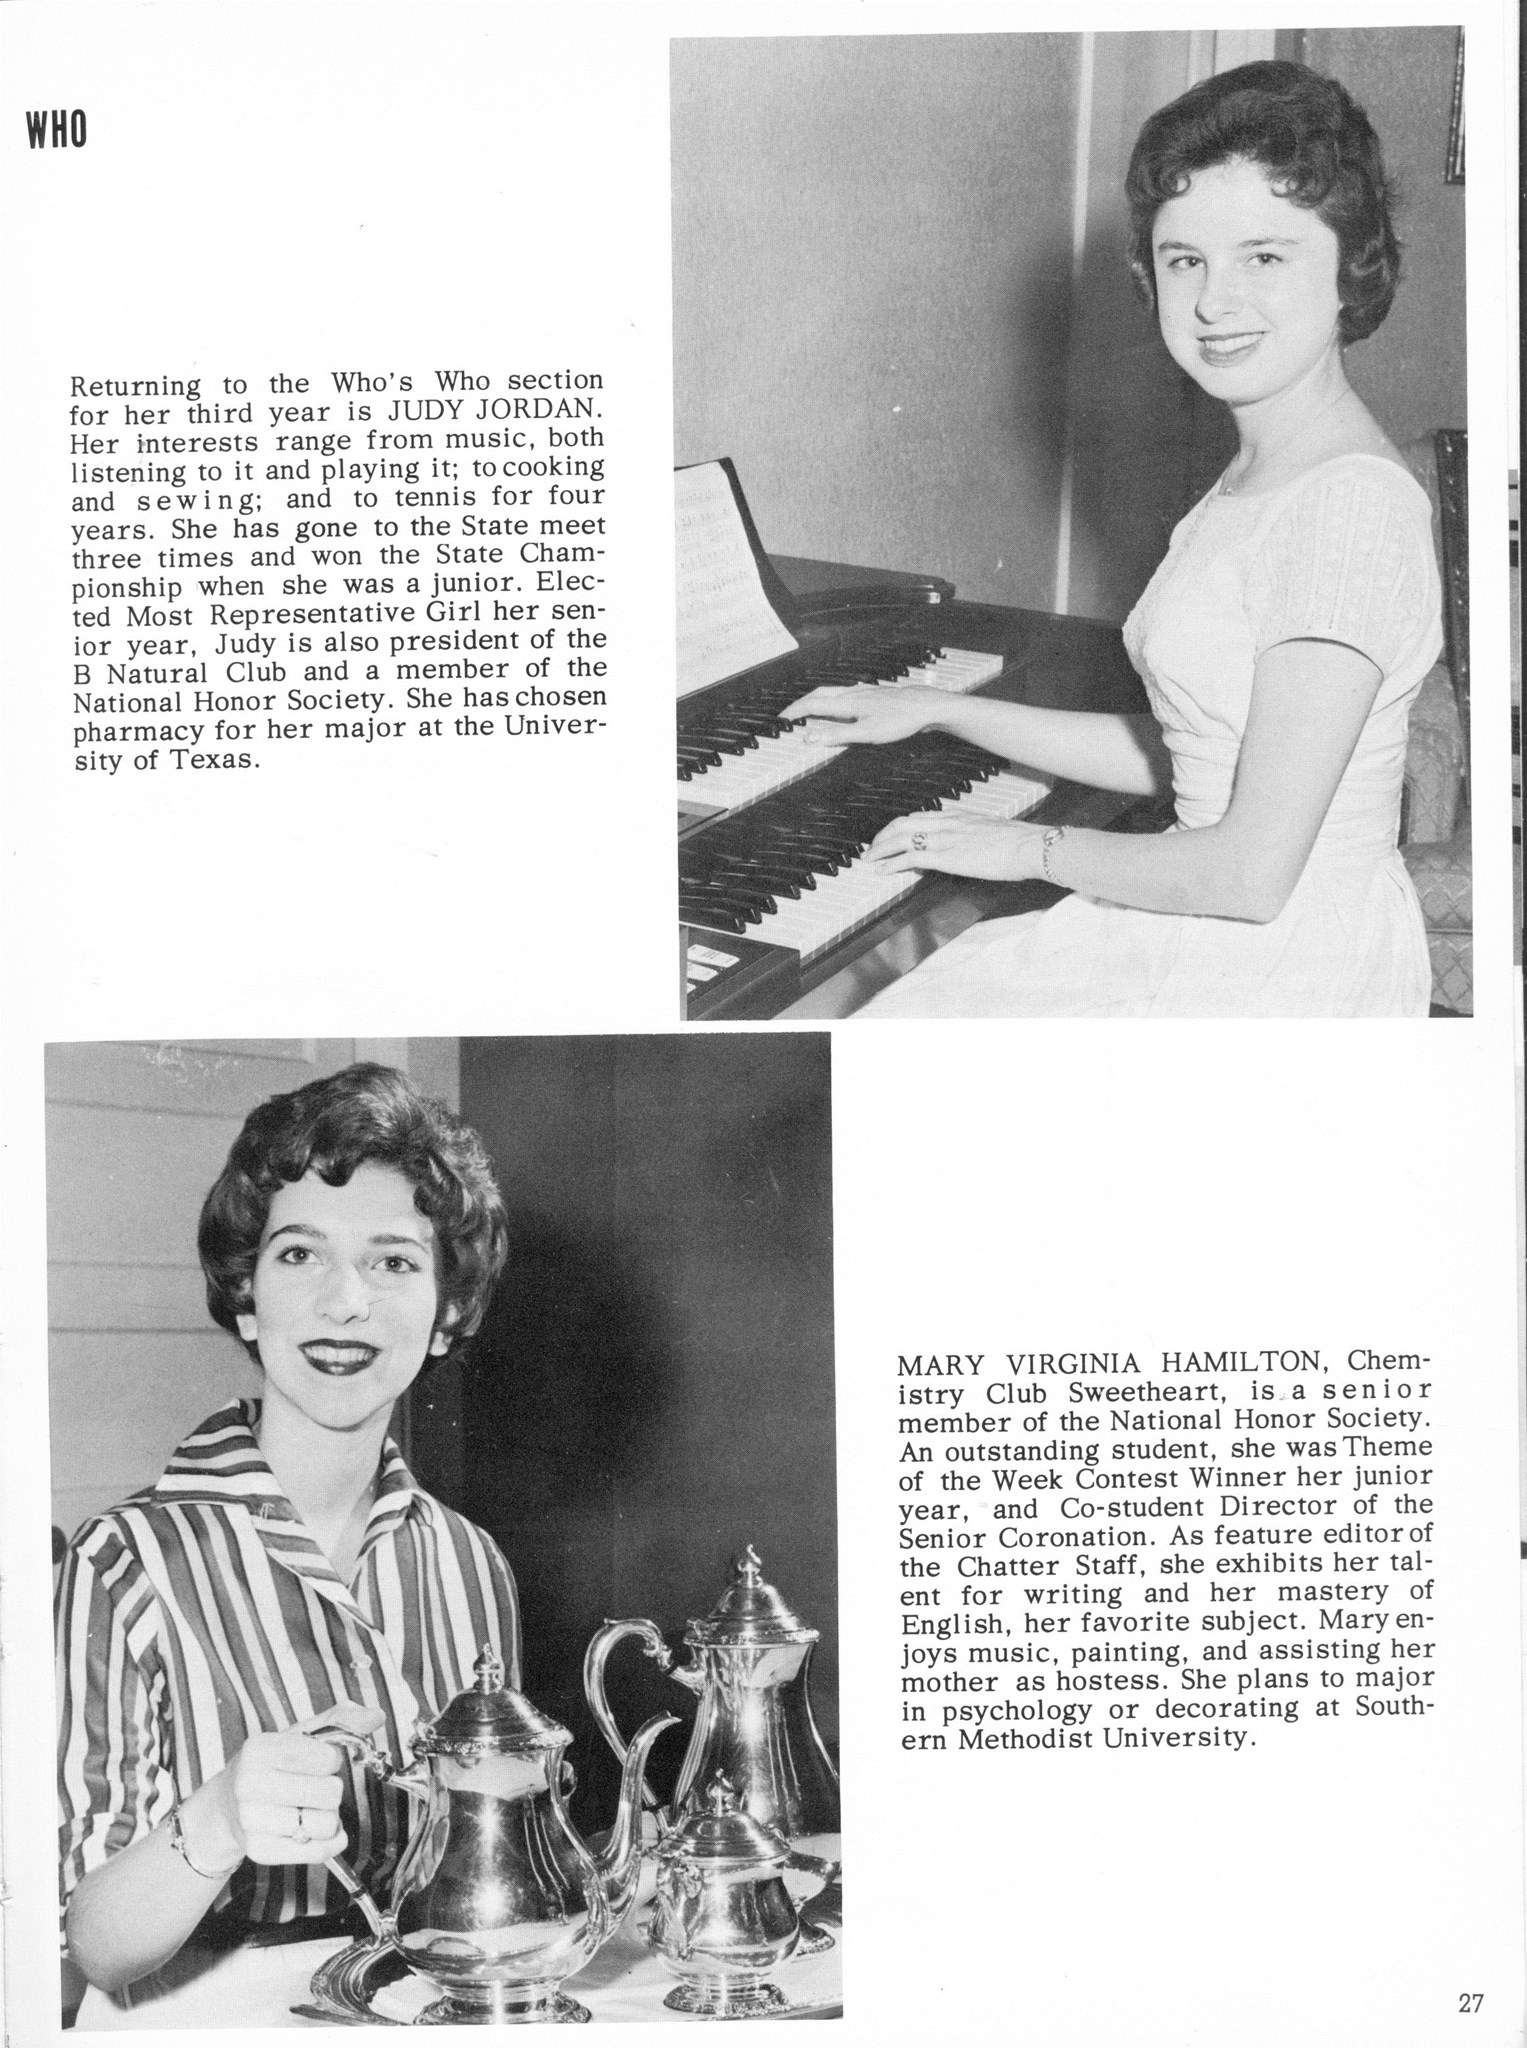 ../../../Images/Large/1960/Arclight-1960-pg0027.jpg